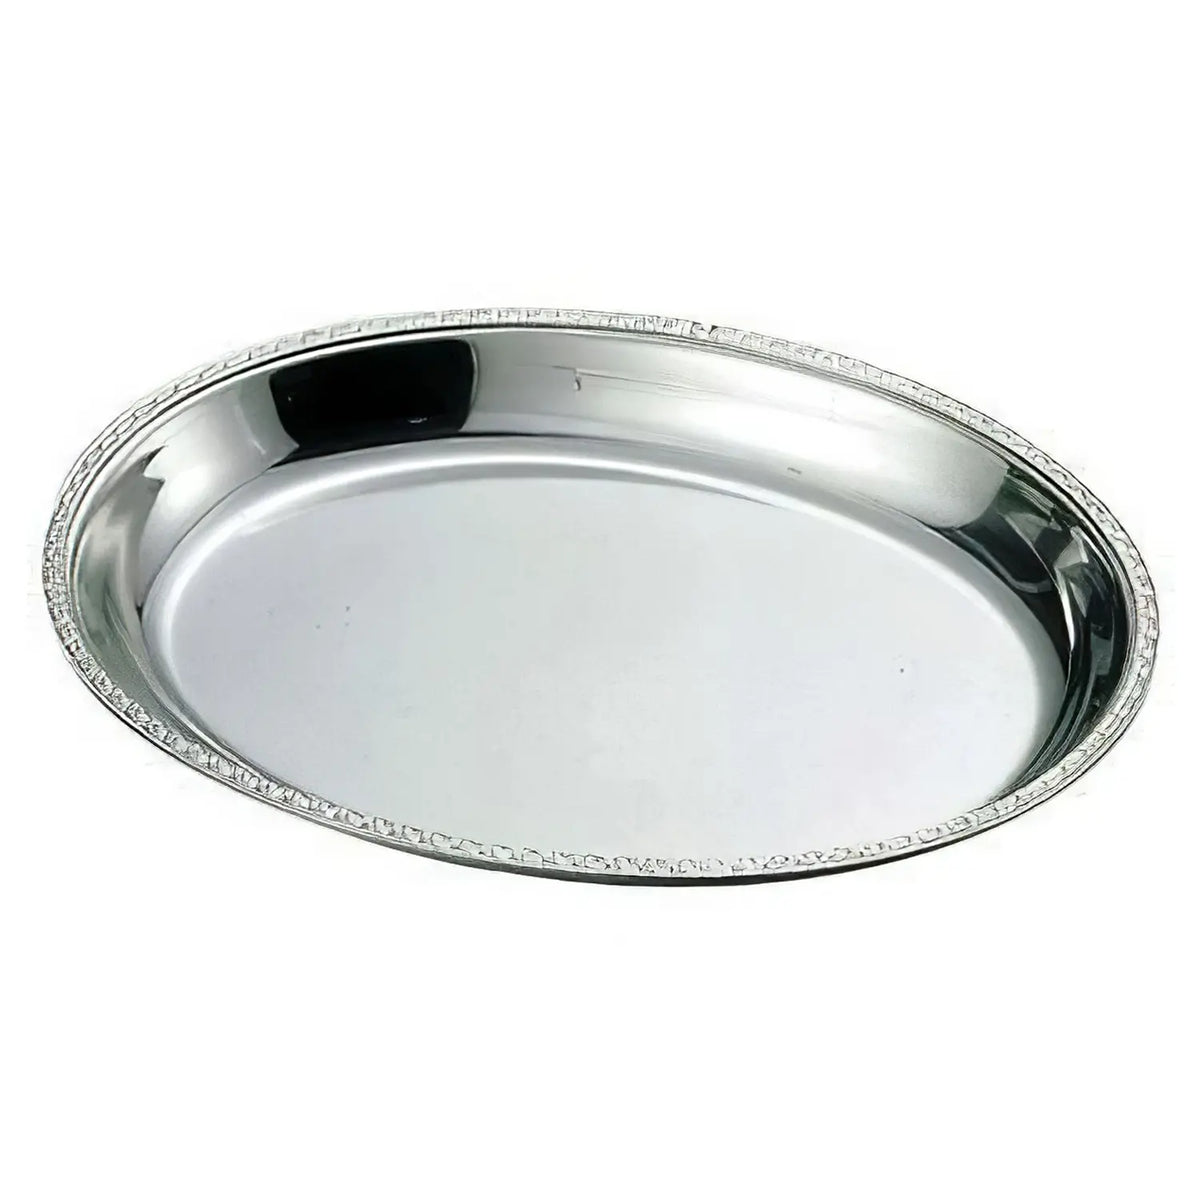 Ikeda Stainless Steel Oval Lunch Plate